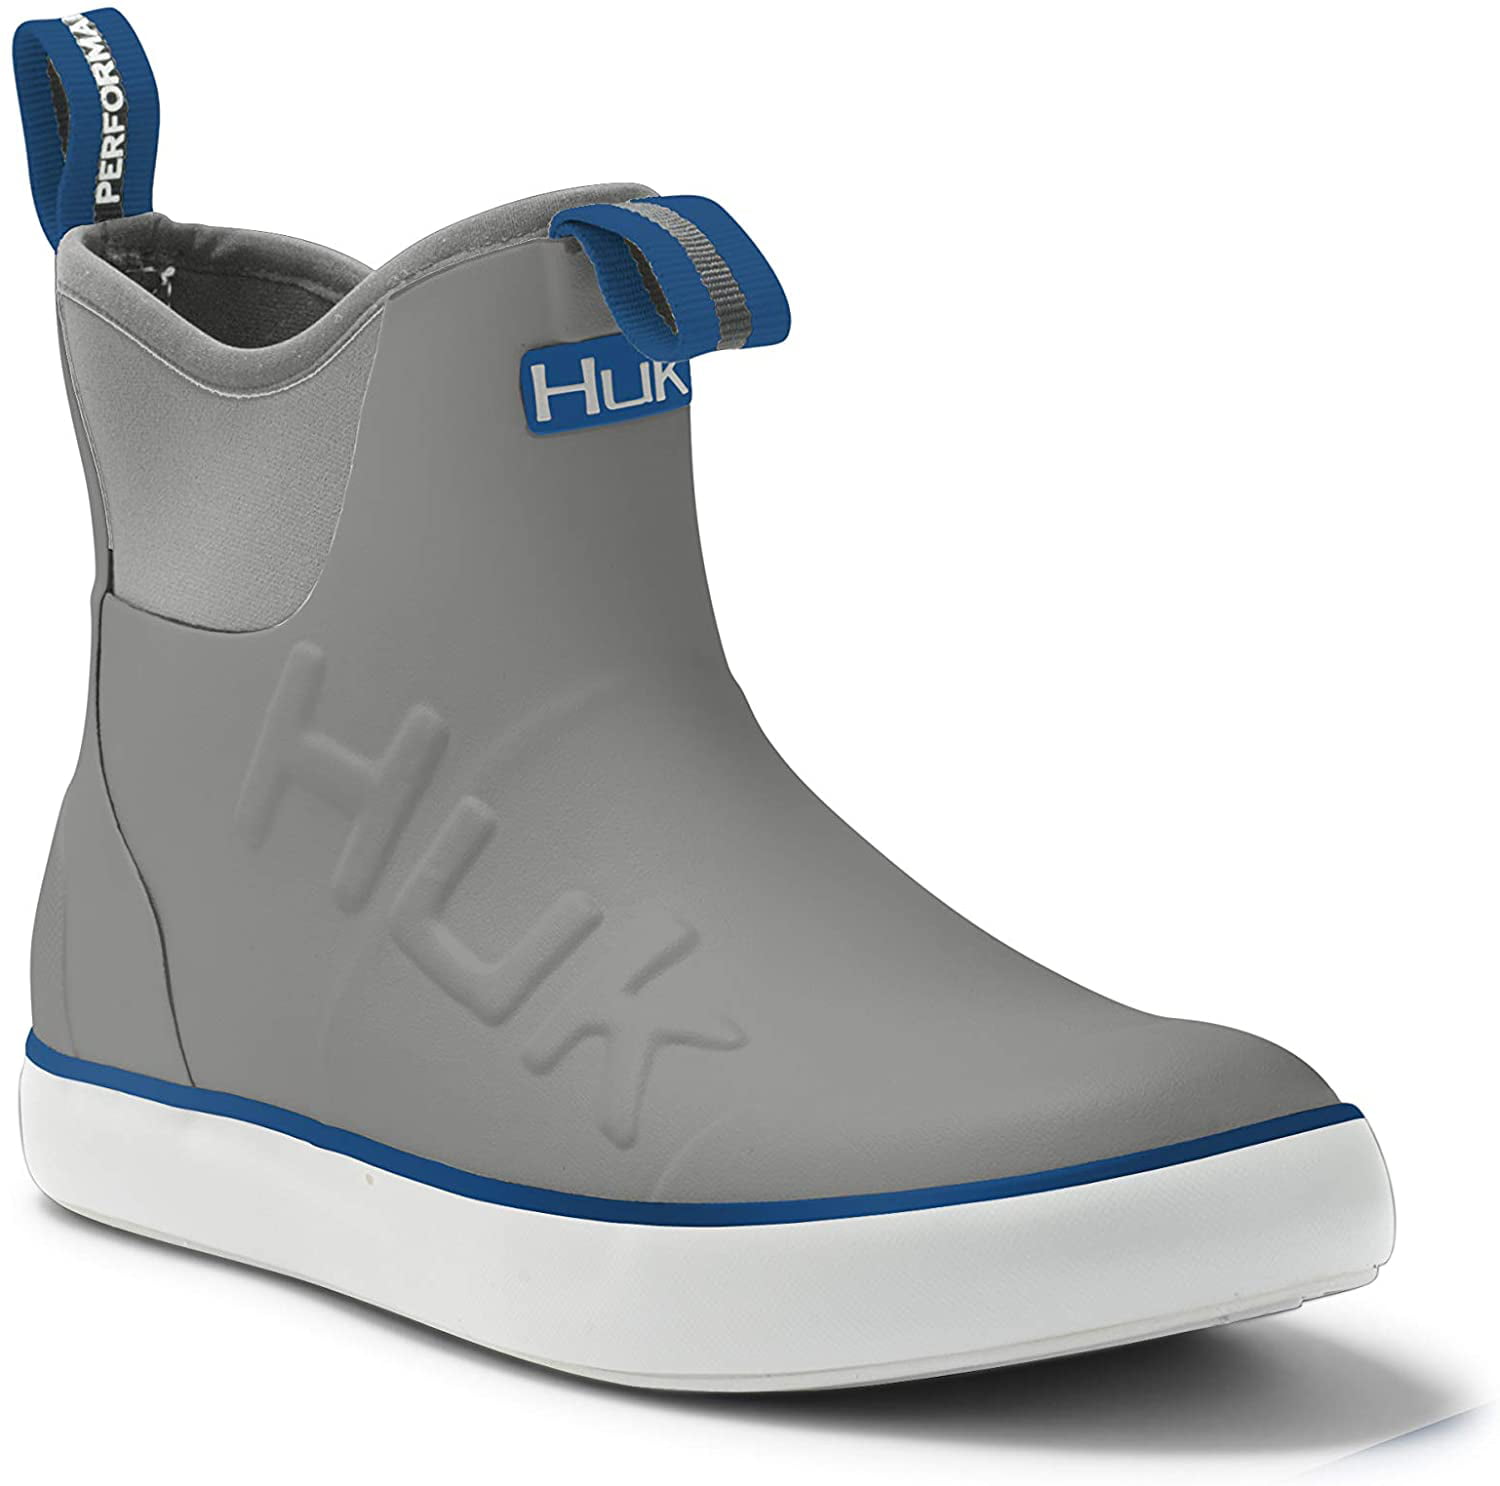 Huk Men's Rogue Wave Huk Blue Size 11 High-Performance Fishing Ankle Boots